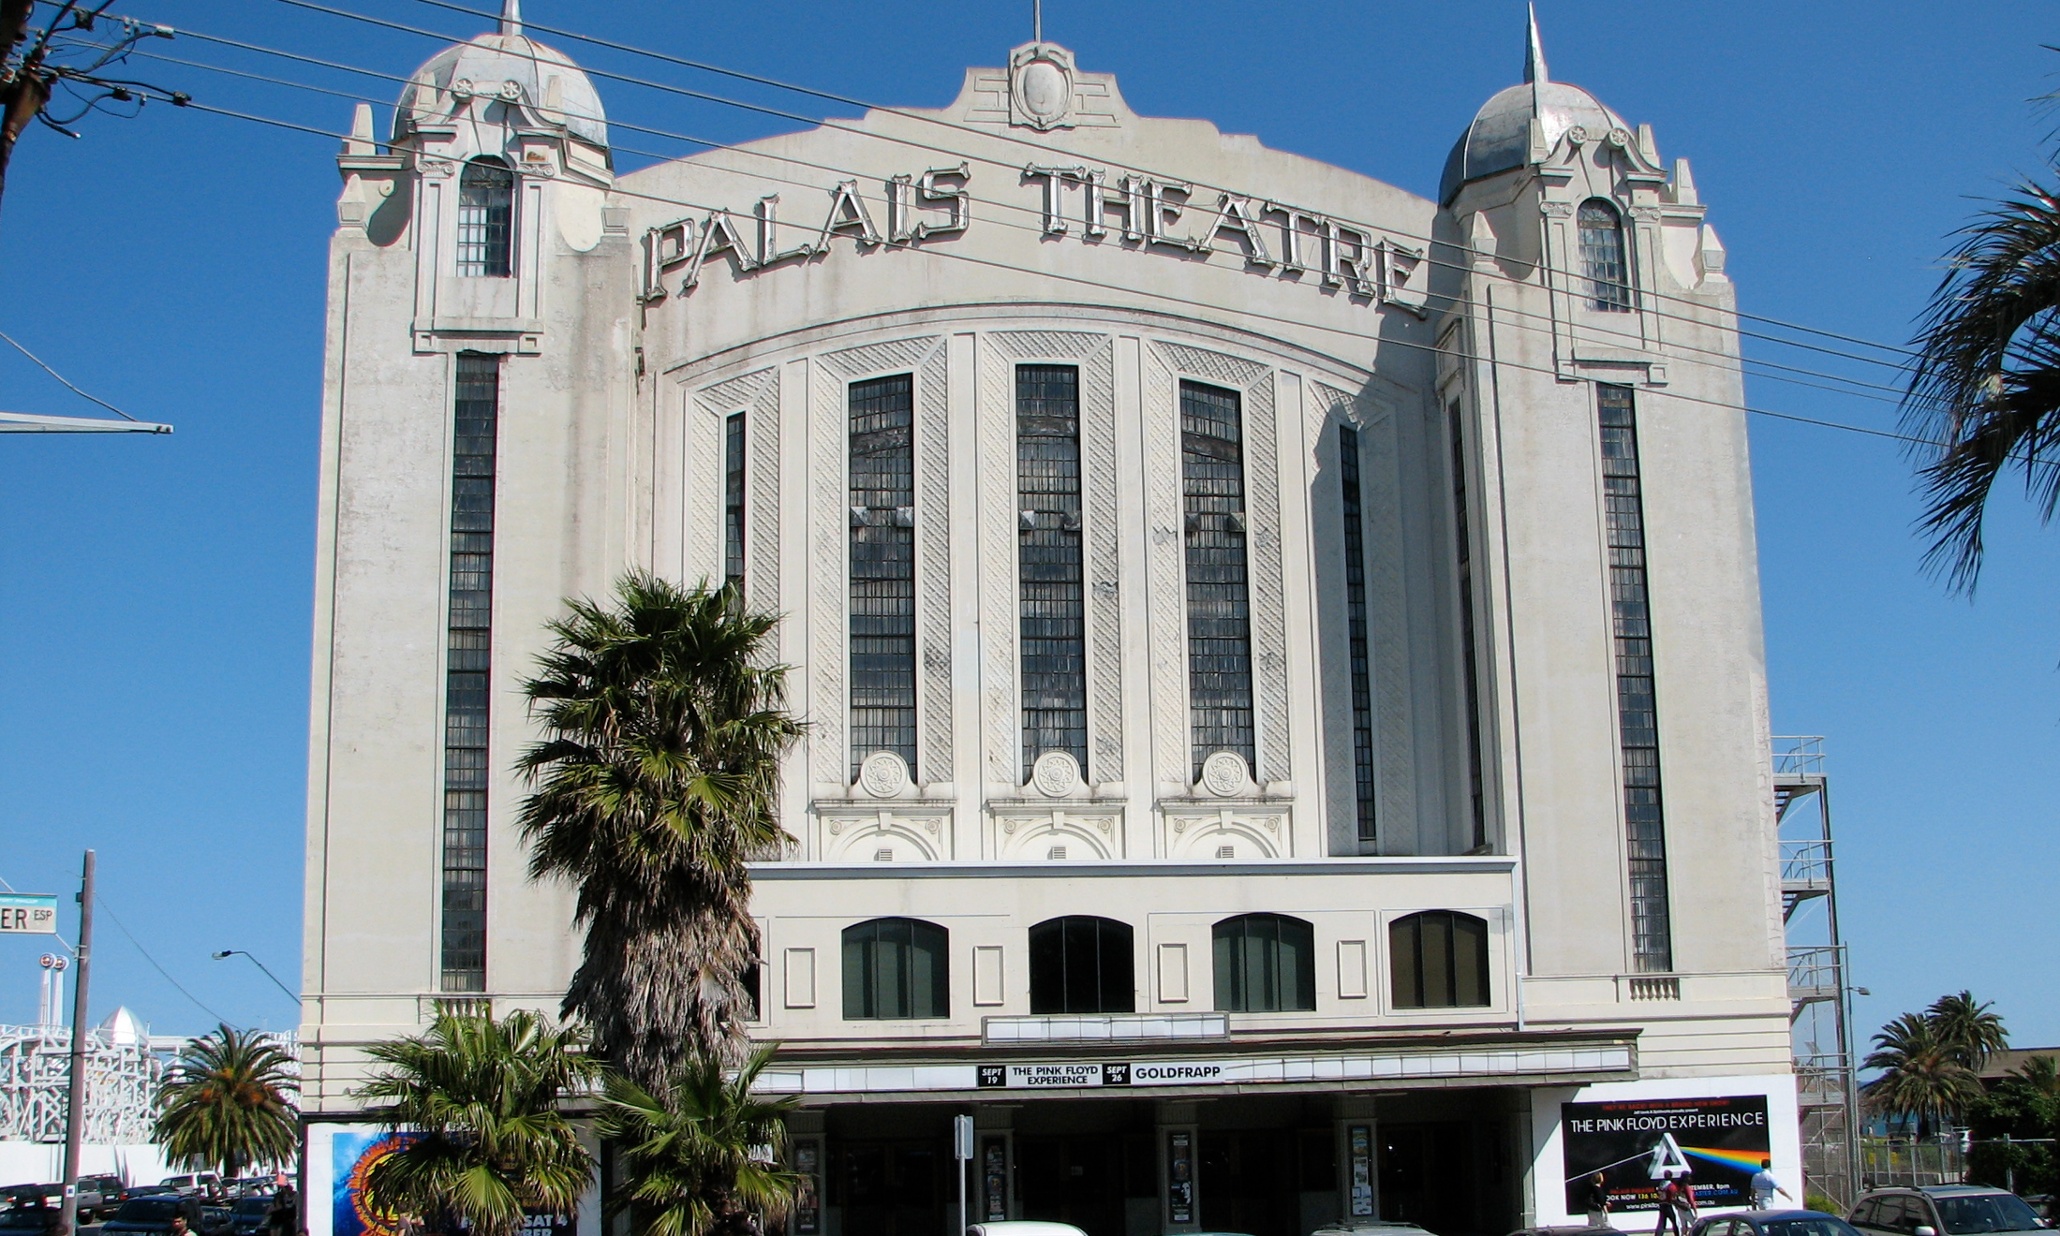 Live Nation takes over Palais Theatre